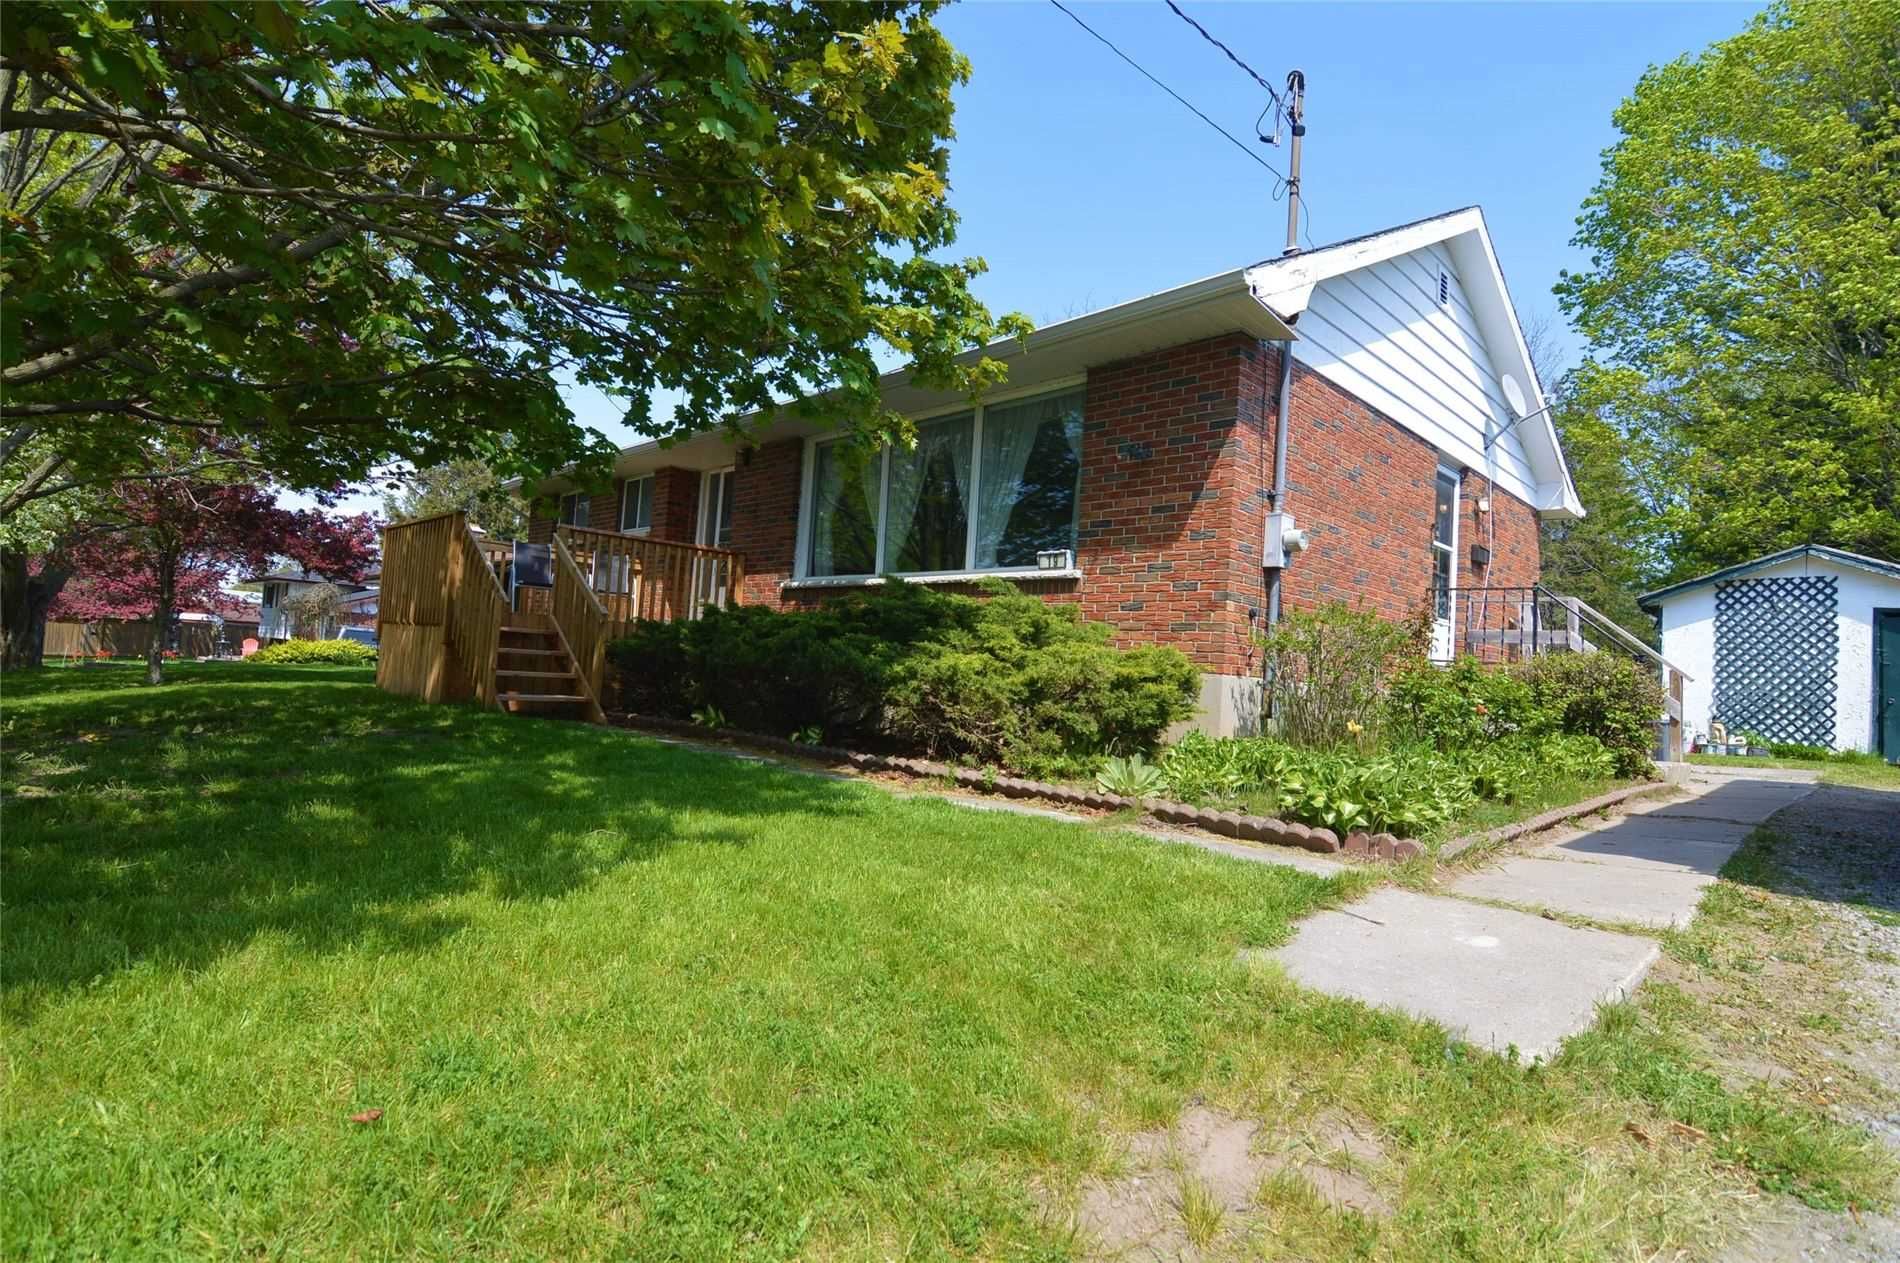 New property listed in Port Hope, Port Hope